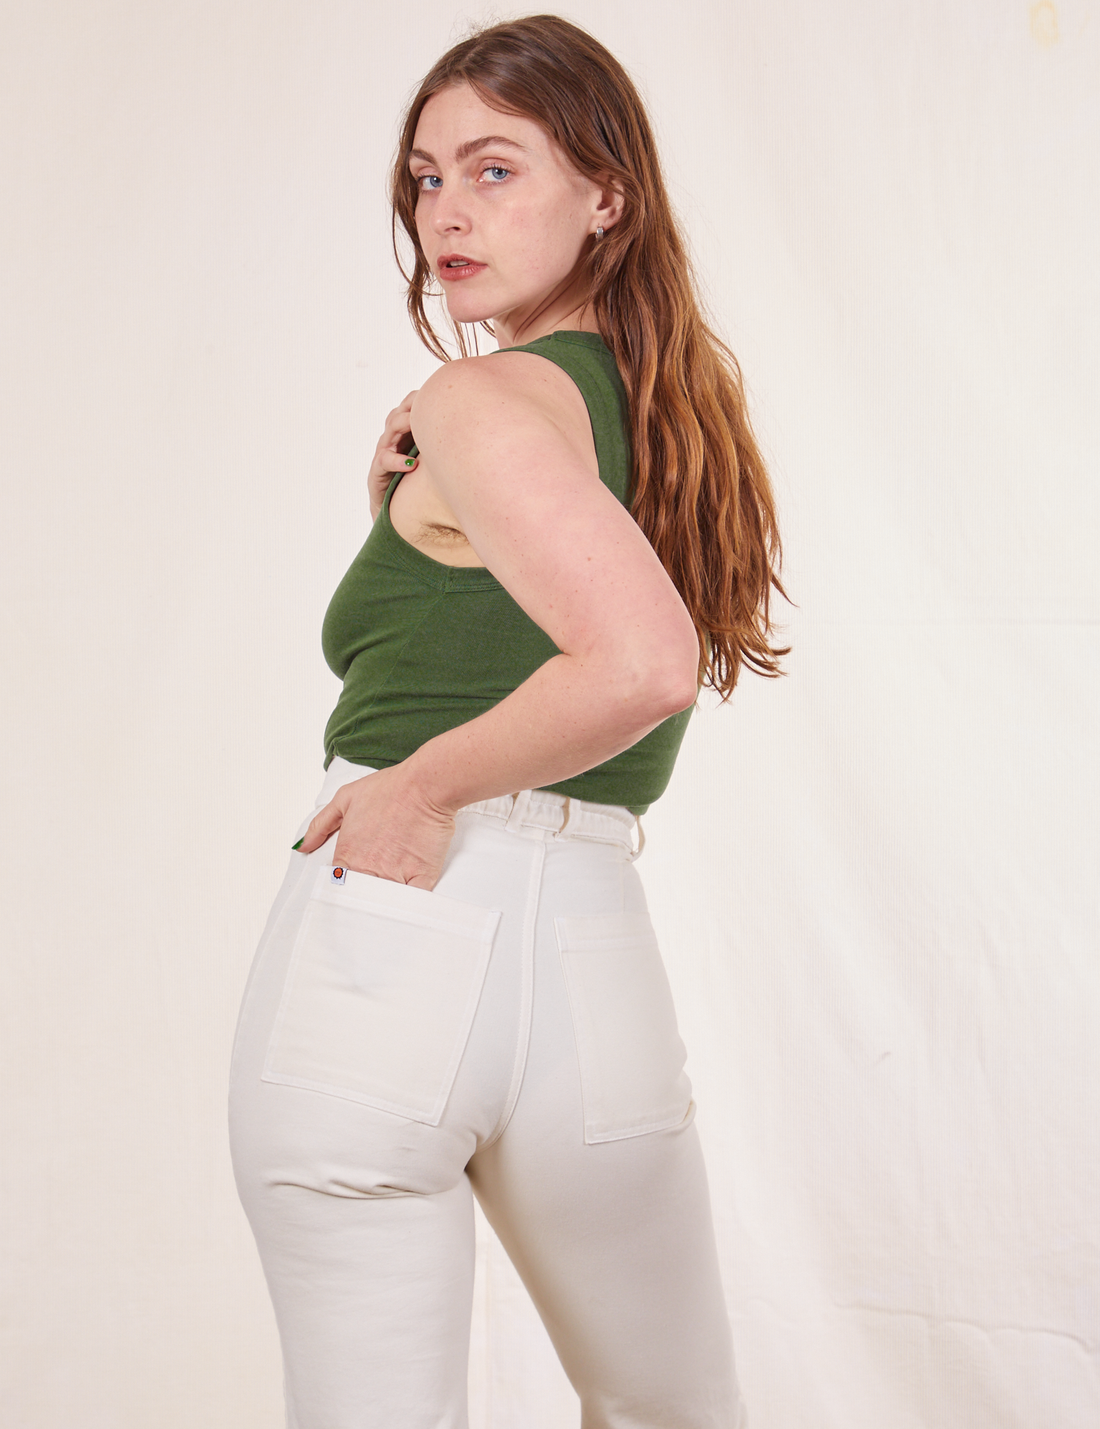 Tank Top in Dark Emerald Green back view on Allison wearing vintage off-white Western Pants. Allison has one hand in the back pocket of the pants.